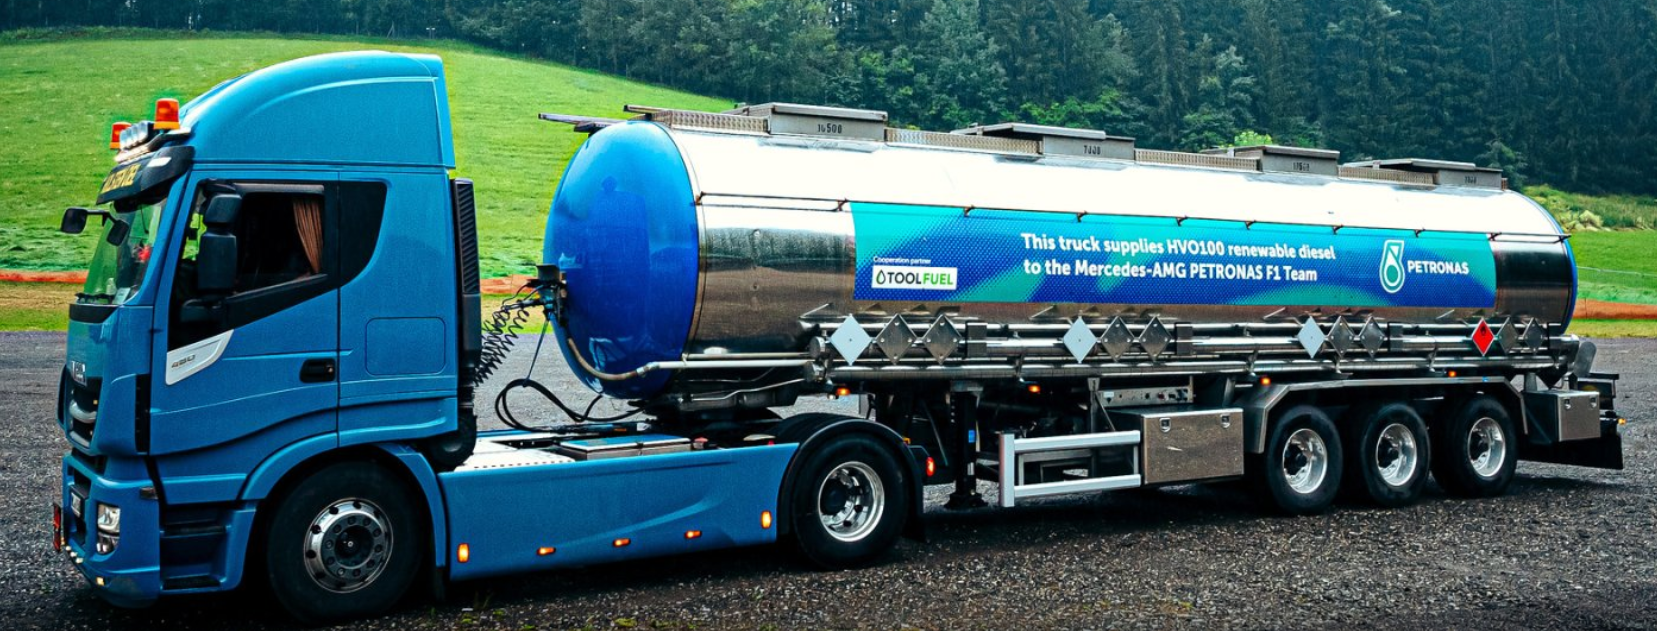 <p>Trucks traveled on HVO100 biofuel for over 386,000km, from a total distance traveled of 460,000 km, and 35% of all generator fuel used was HVO100.2.</p>